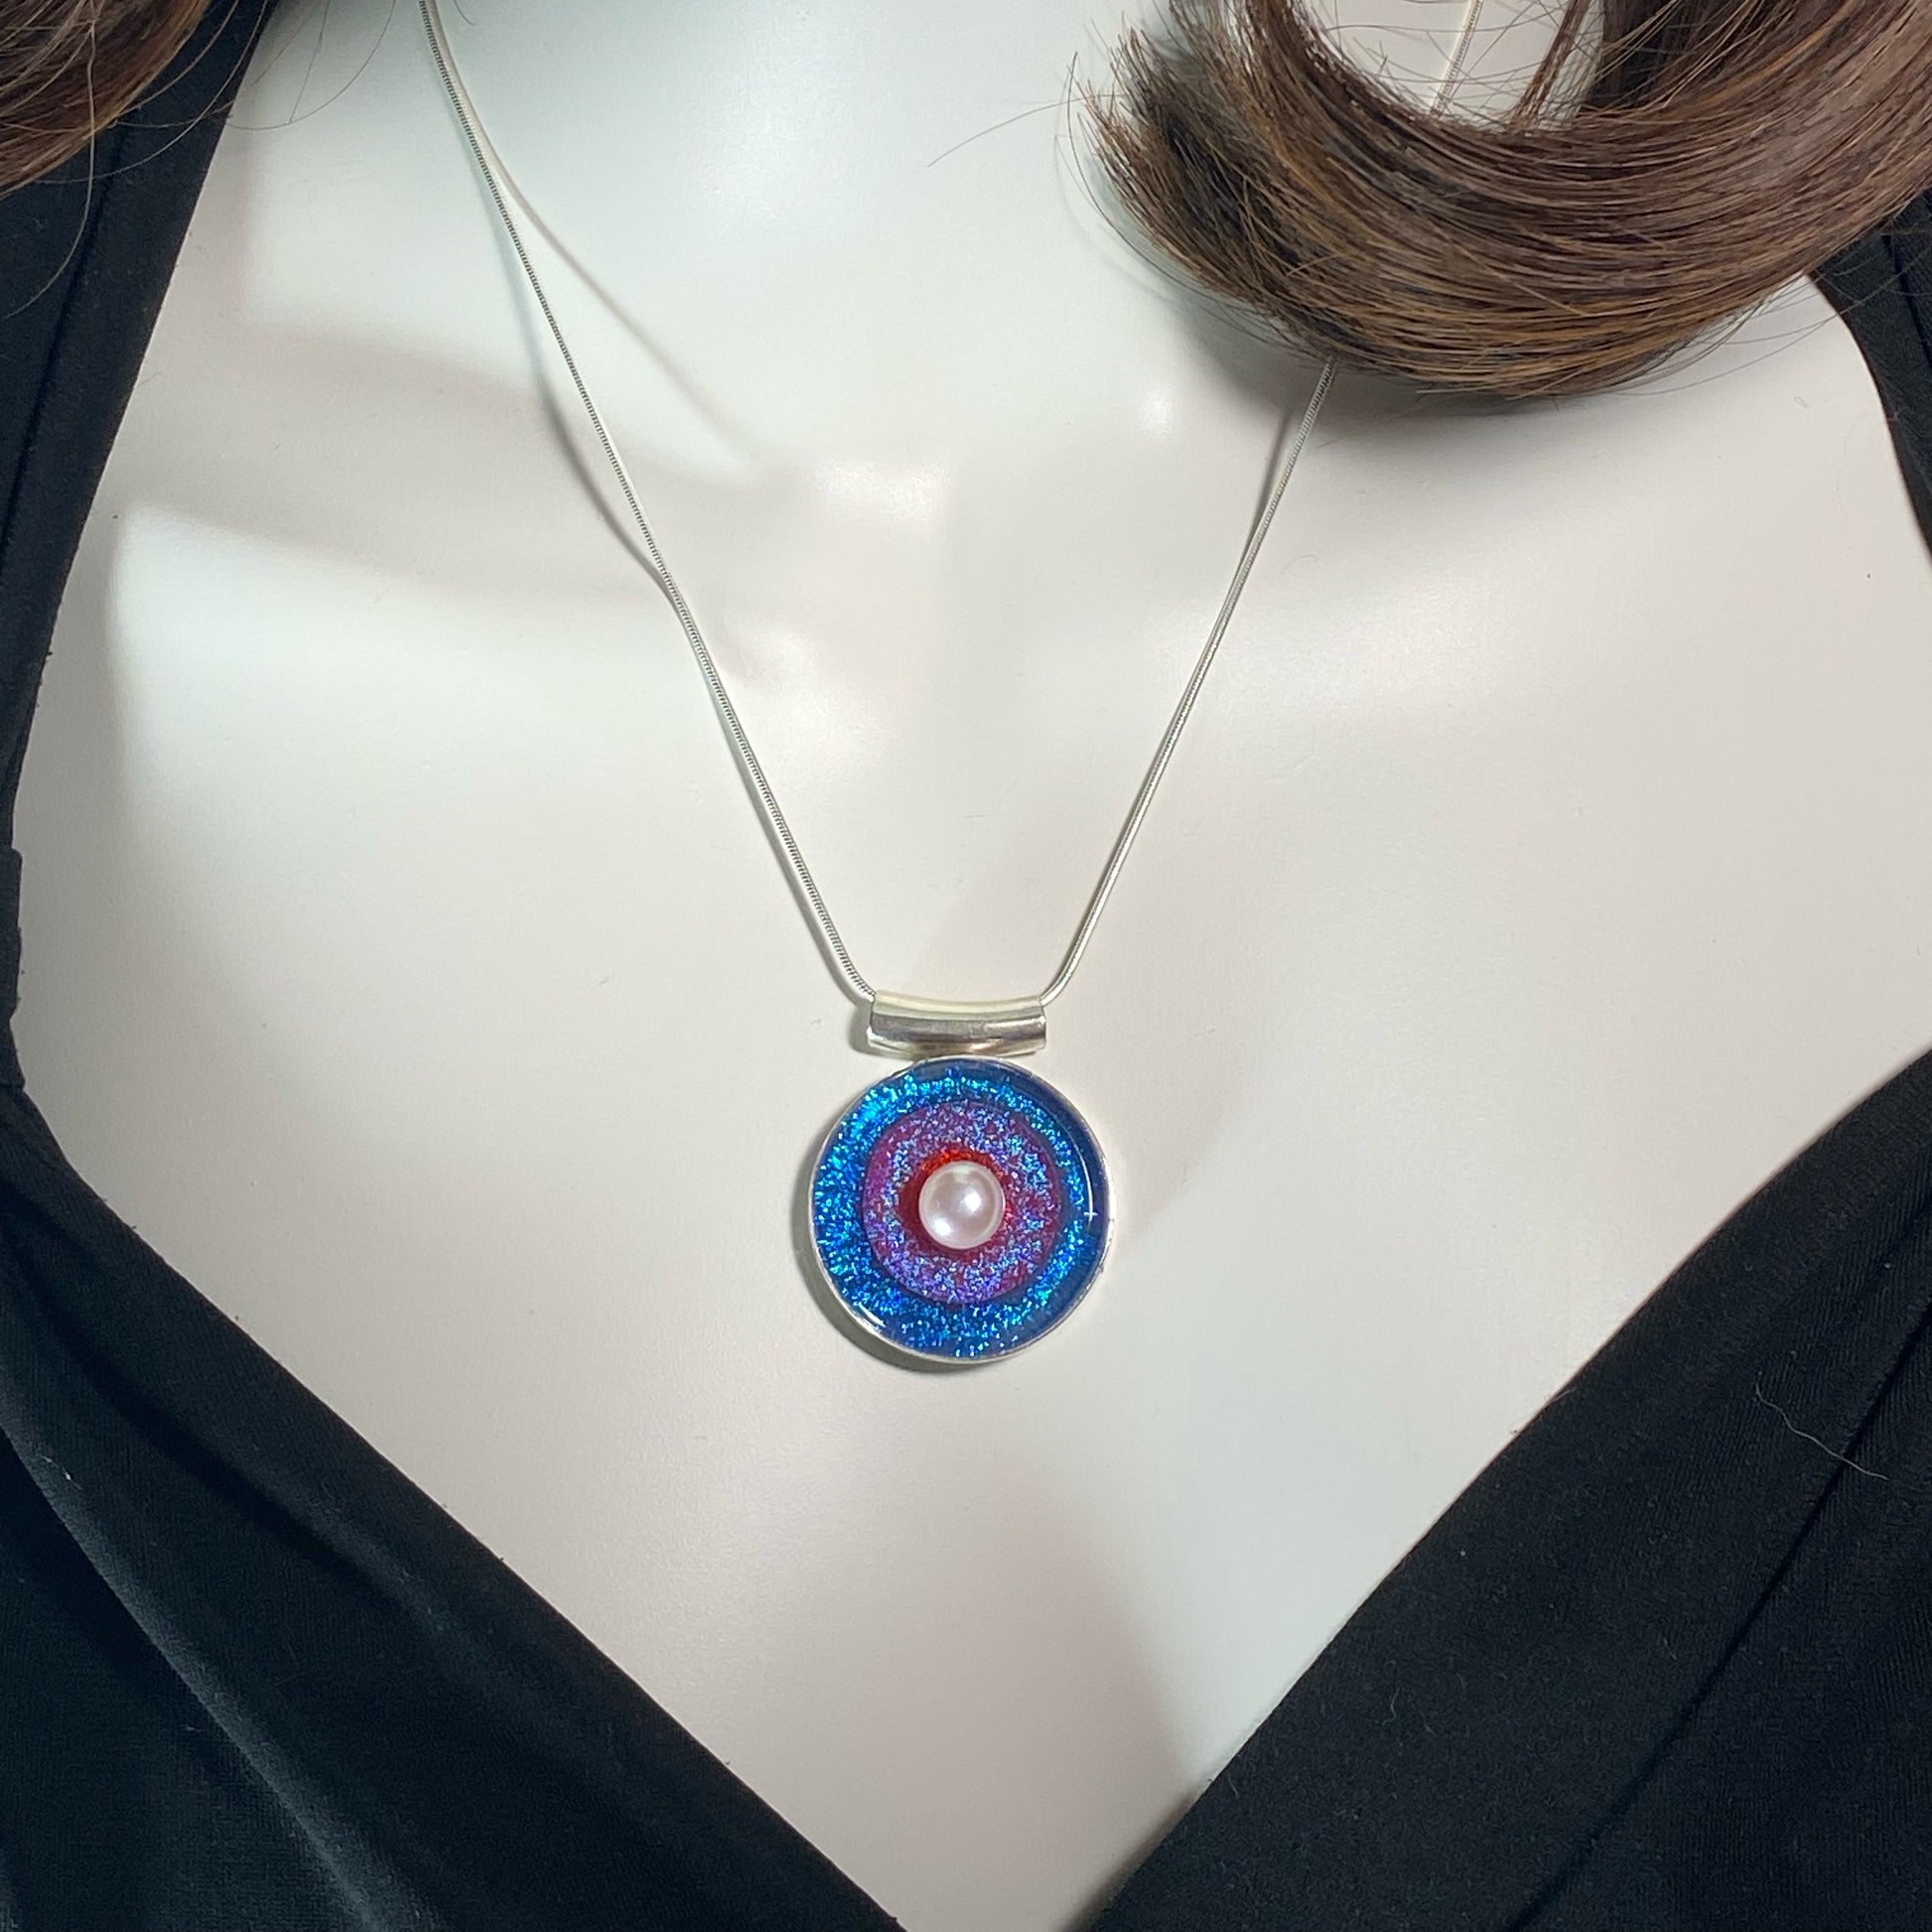 Triple ring bullseye circle pendant with pearl in blue, purple and orange glass, fused glass, glass jewelry, glass and silver jewelry, handmade, handcrafted, American Craft, hand fabricated jewelry, hand fabricated jewellery, Athen, Georgia, colorful jewelry, sparkle, bullseye glass, dichroic glass, art jewelry